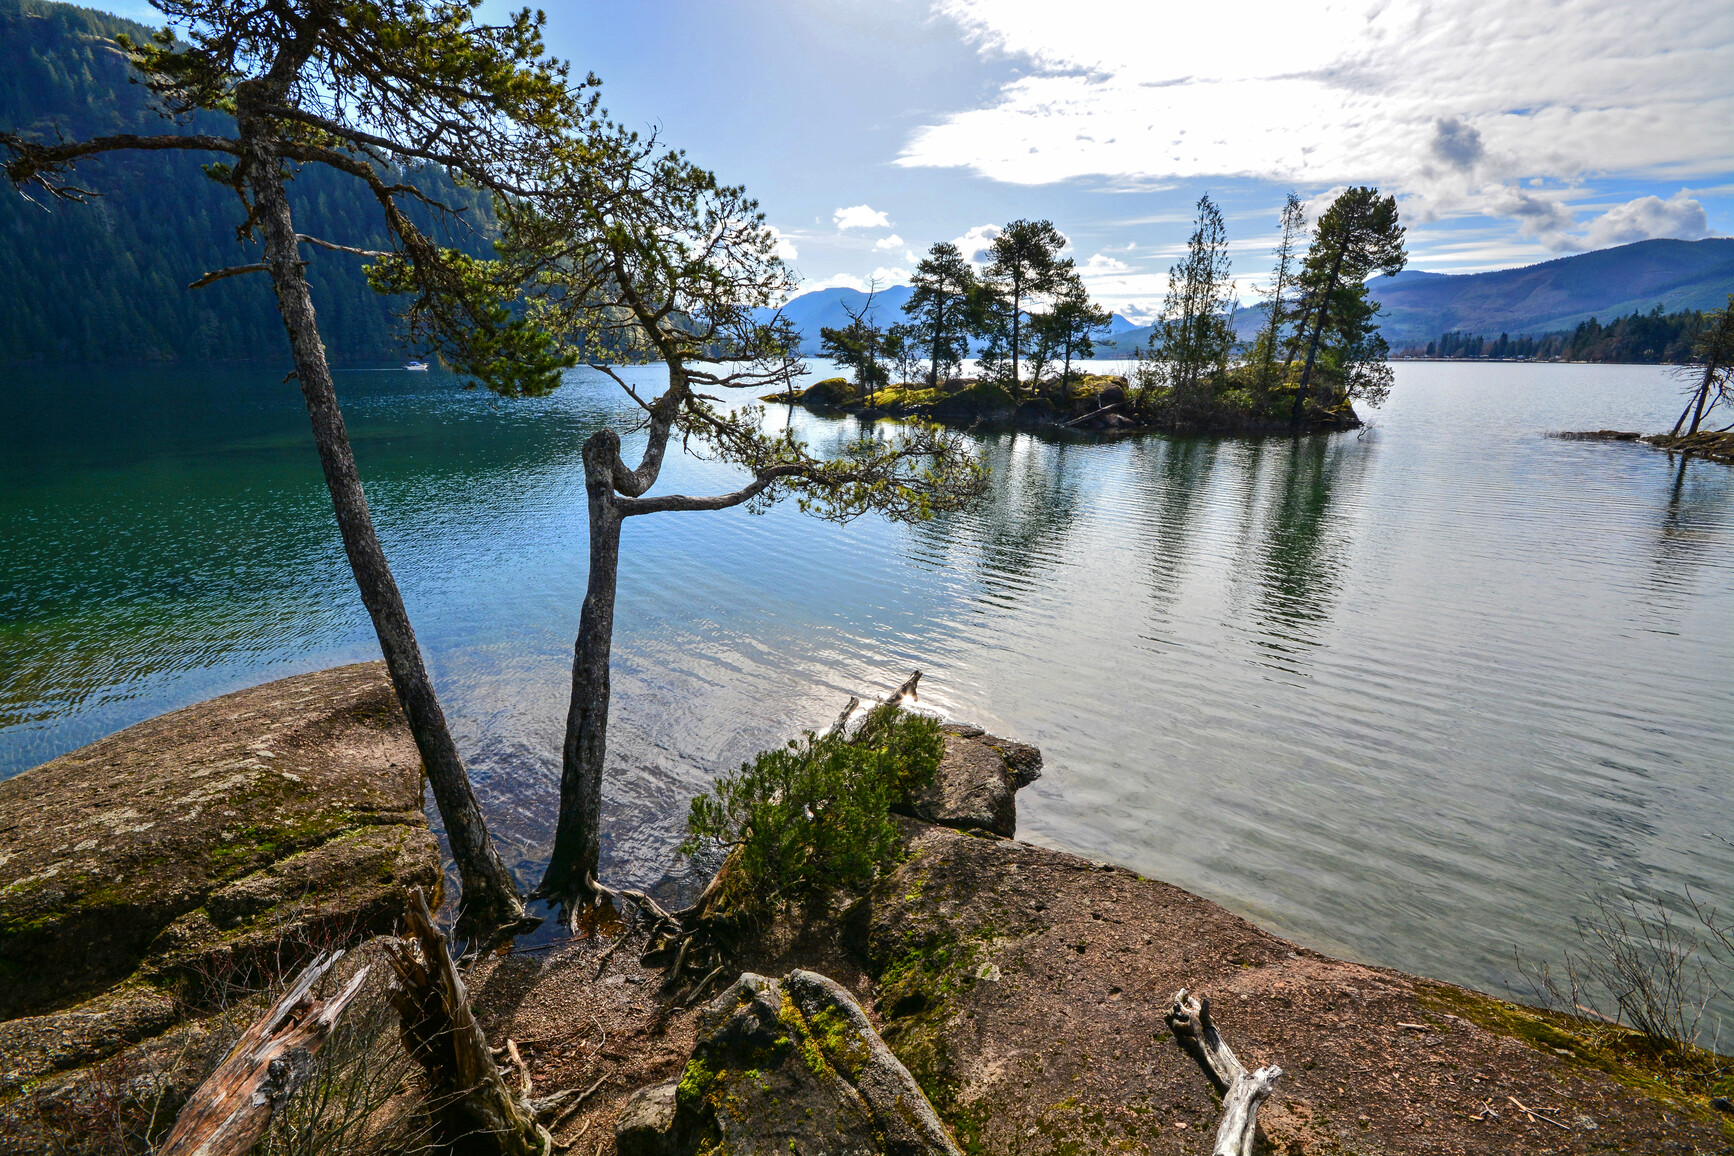 View of lake, island, mountains and forests.